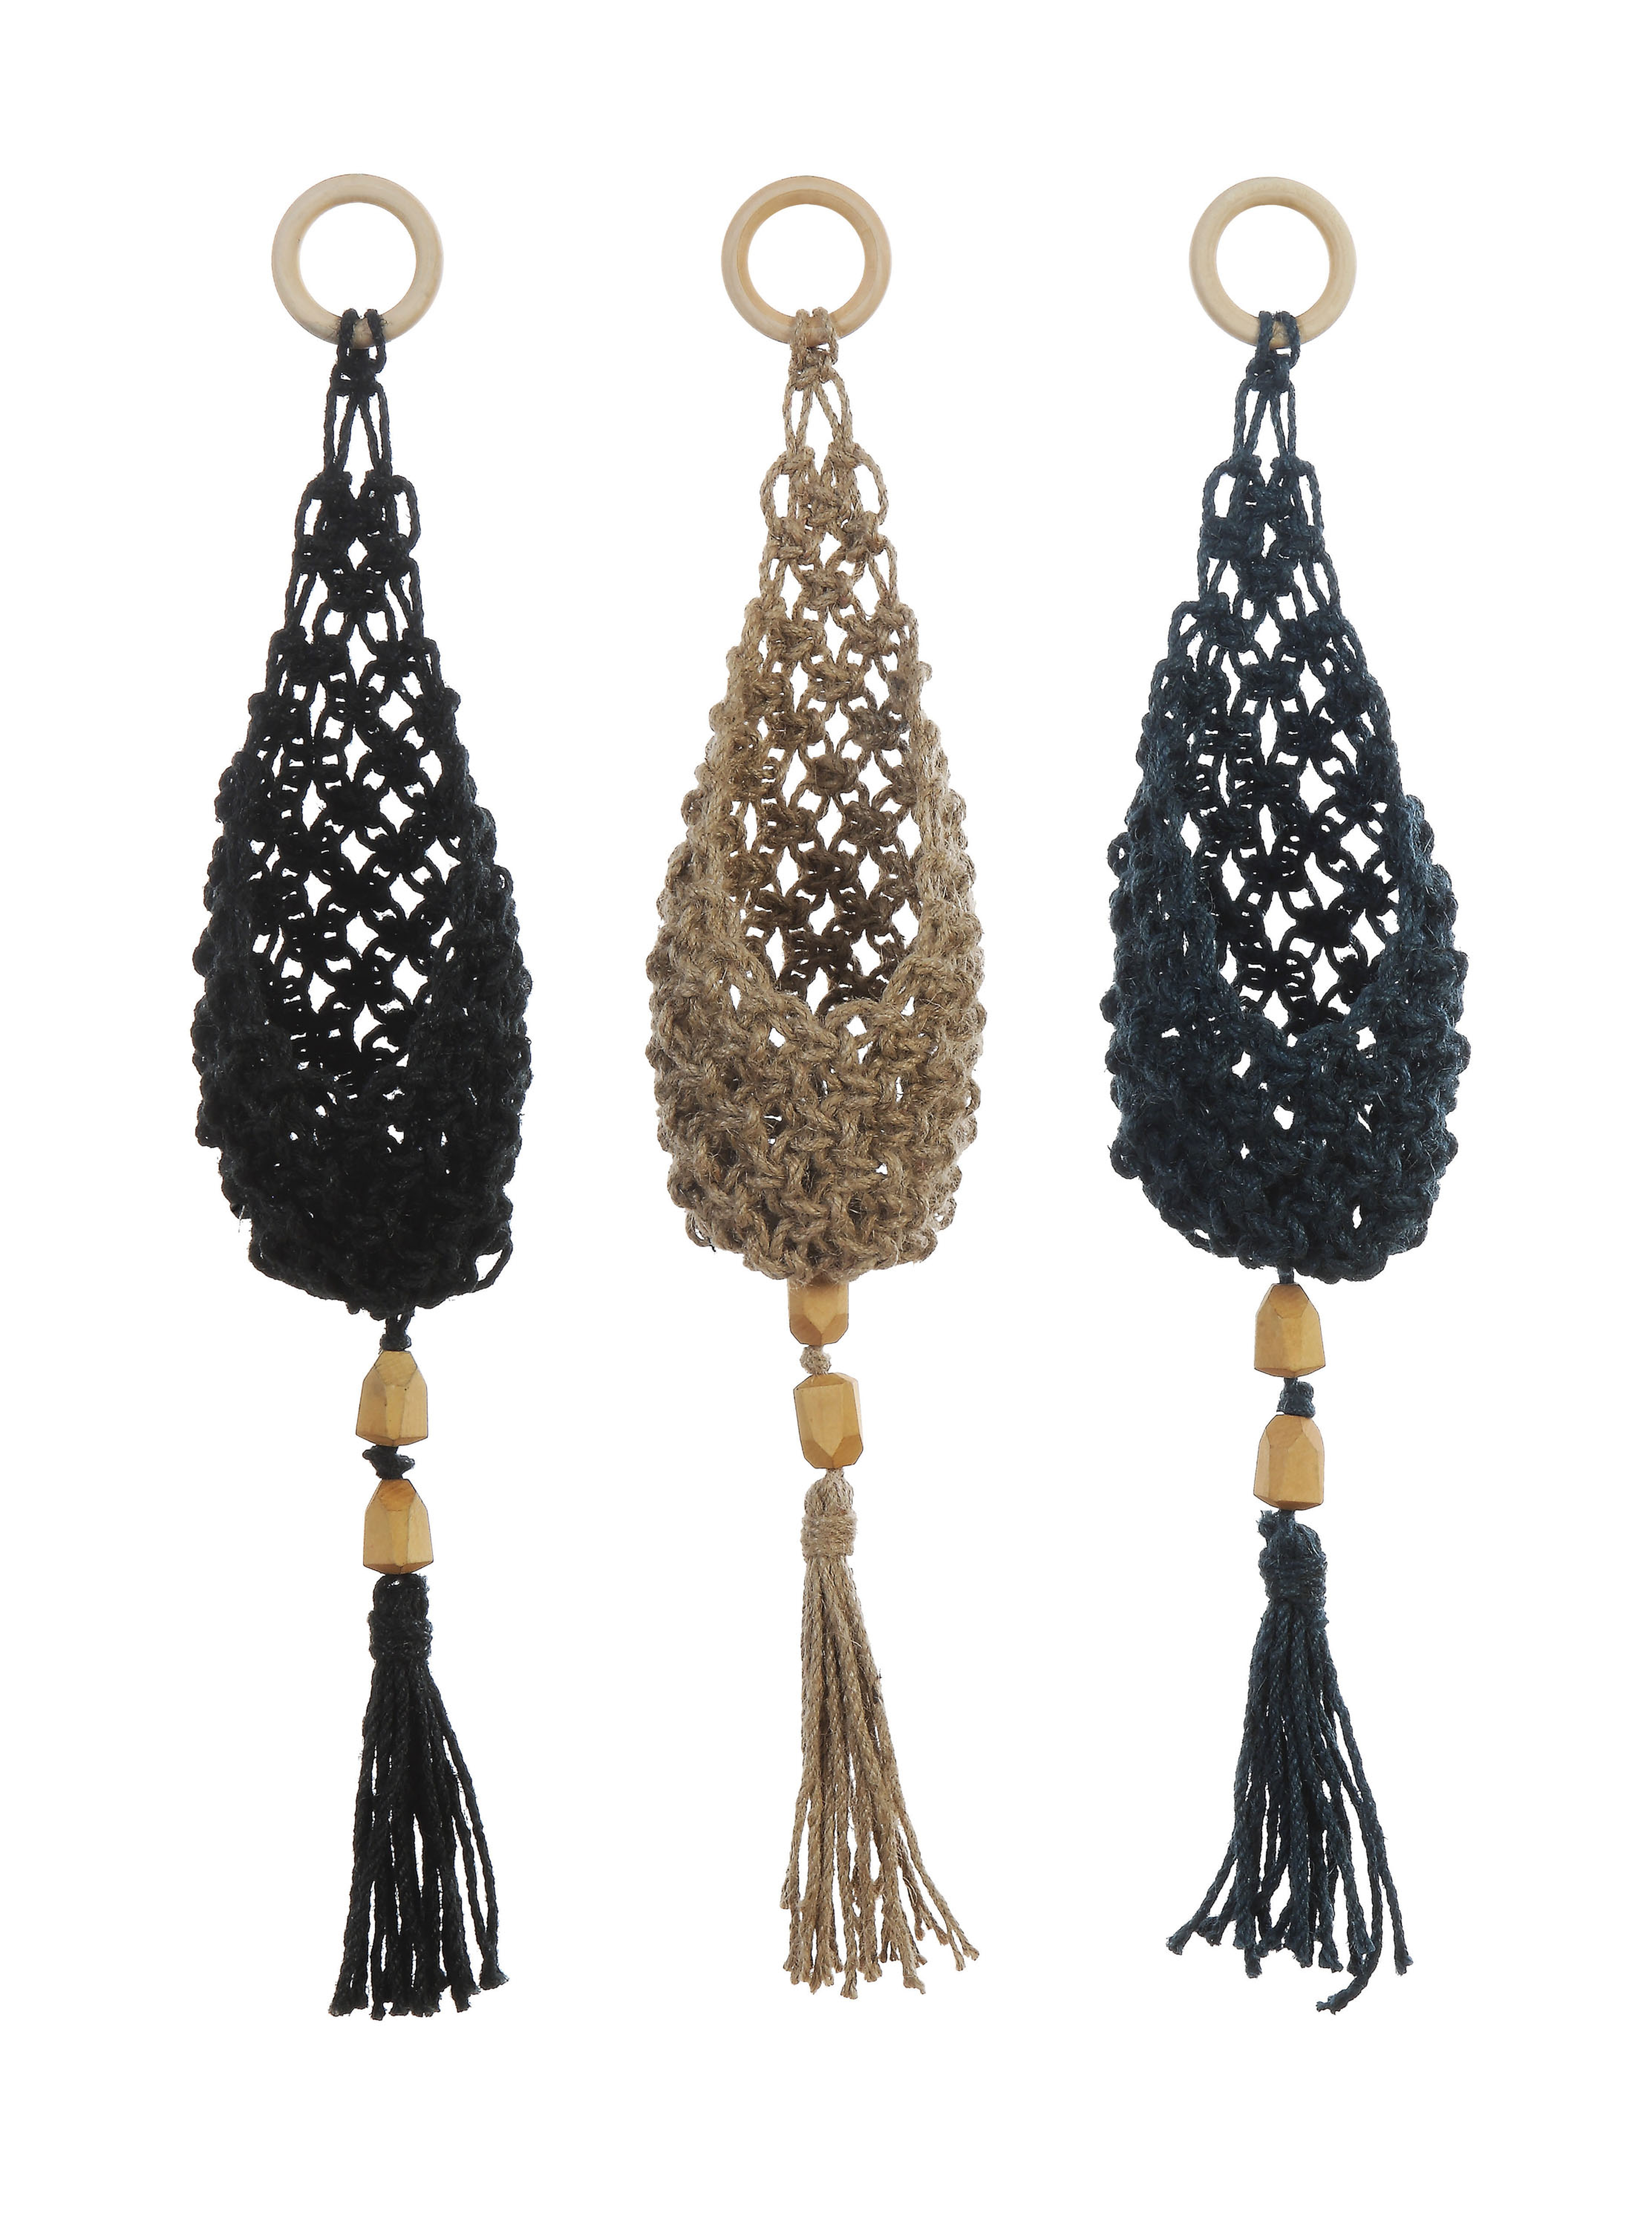 Woven Jute Hanging Wall Pocket/Planter with Wood Beads & Tassel (Set of 3 Colors) - Nomad Home